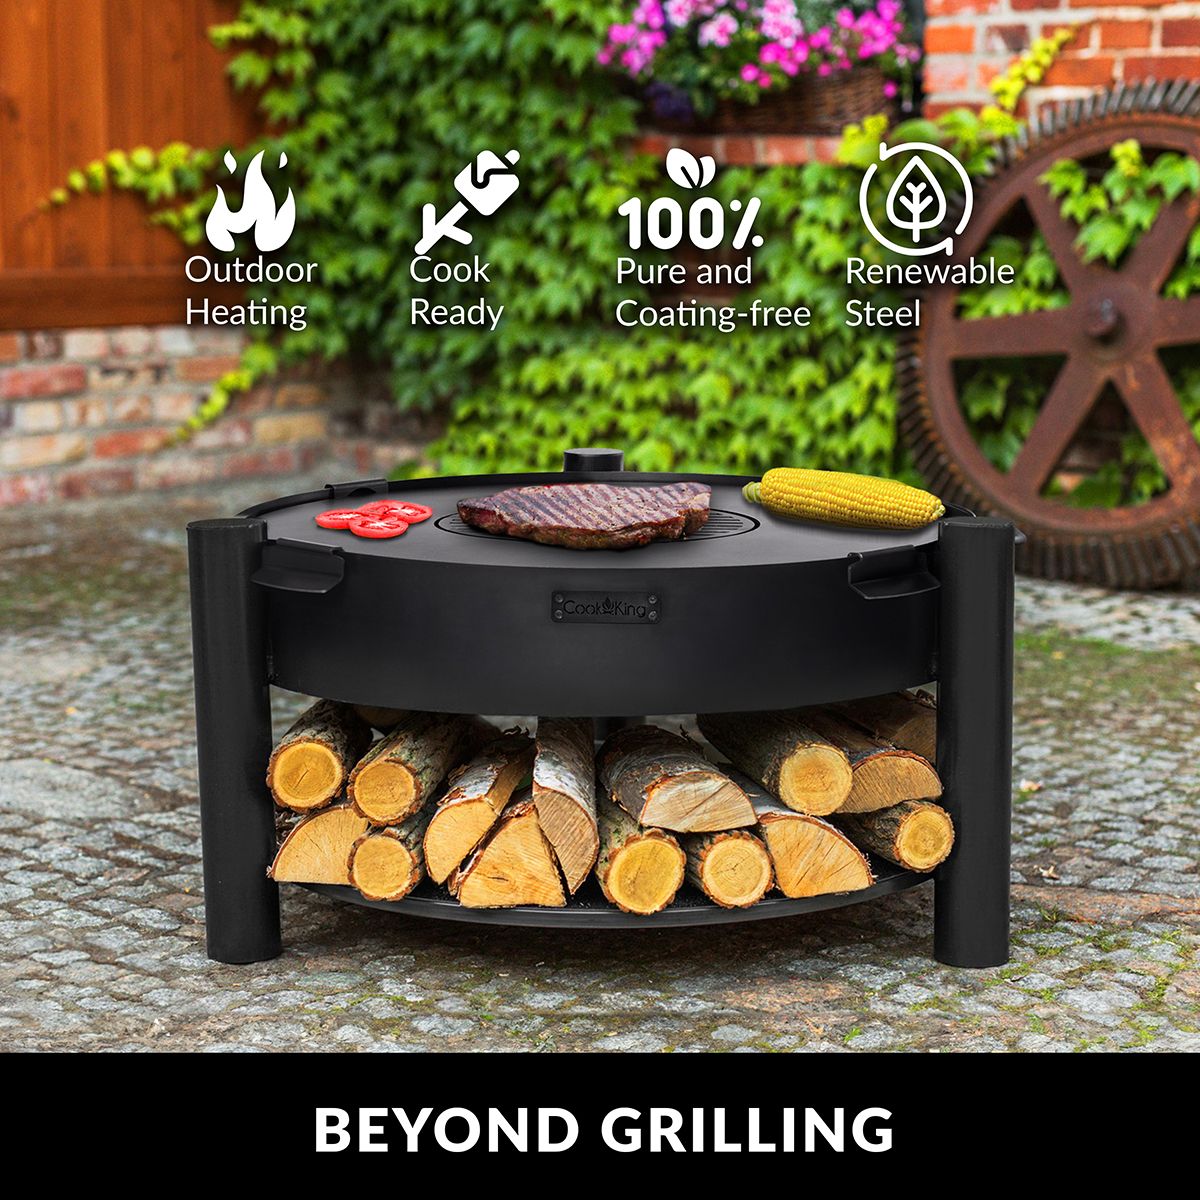 Hearth 24" Fire Pit with Grill Plate - Good Directions